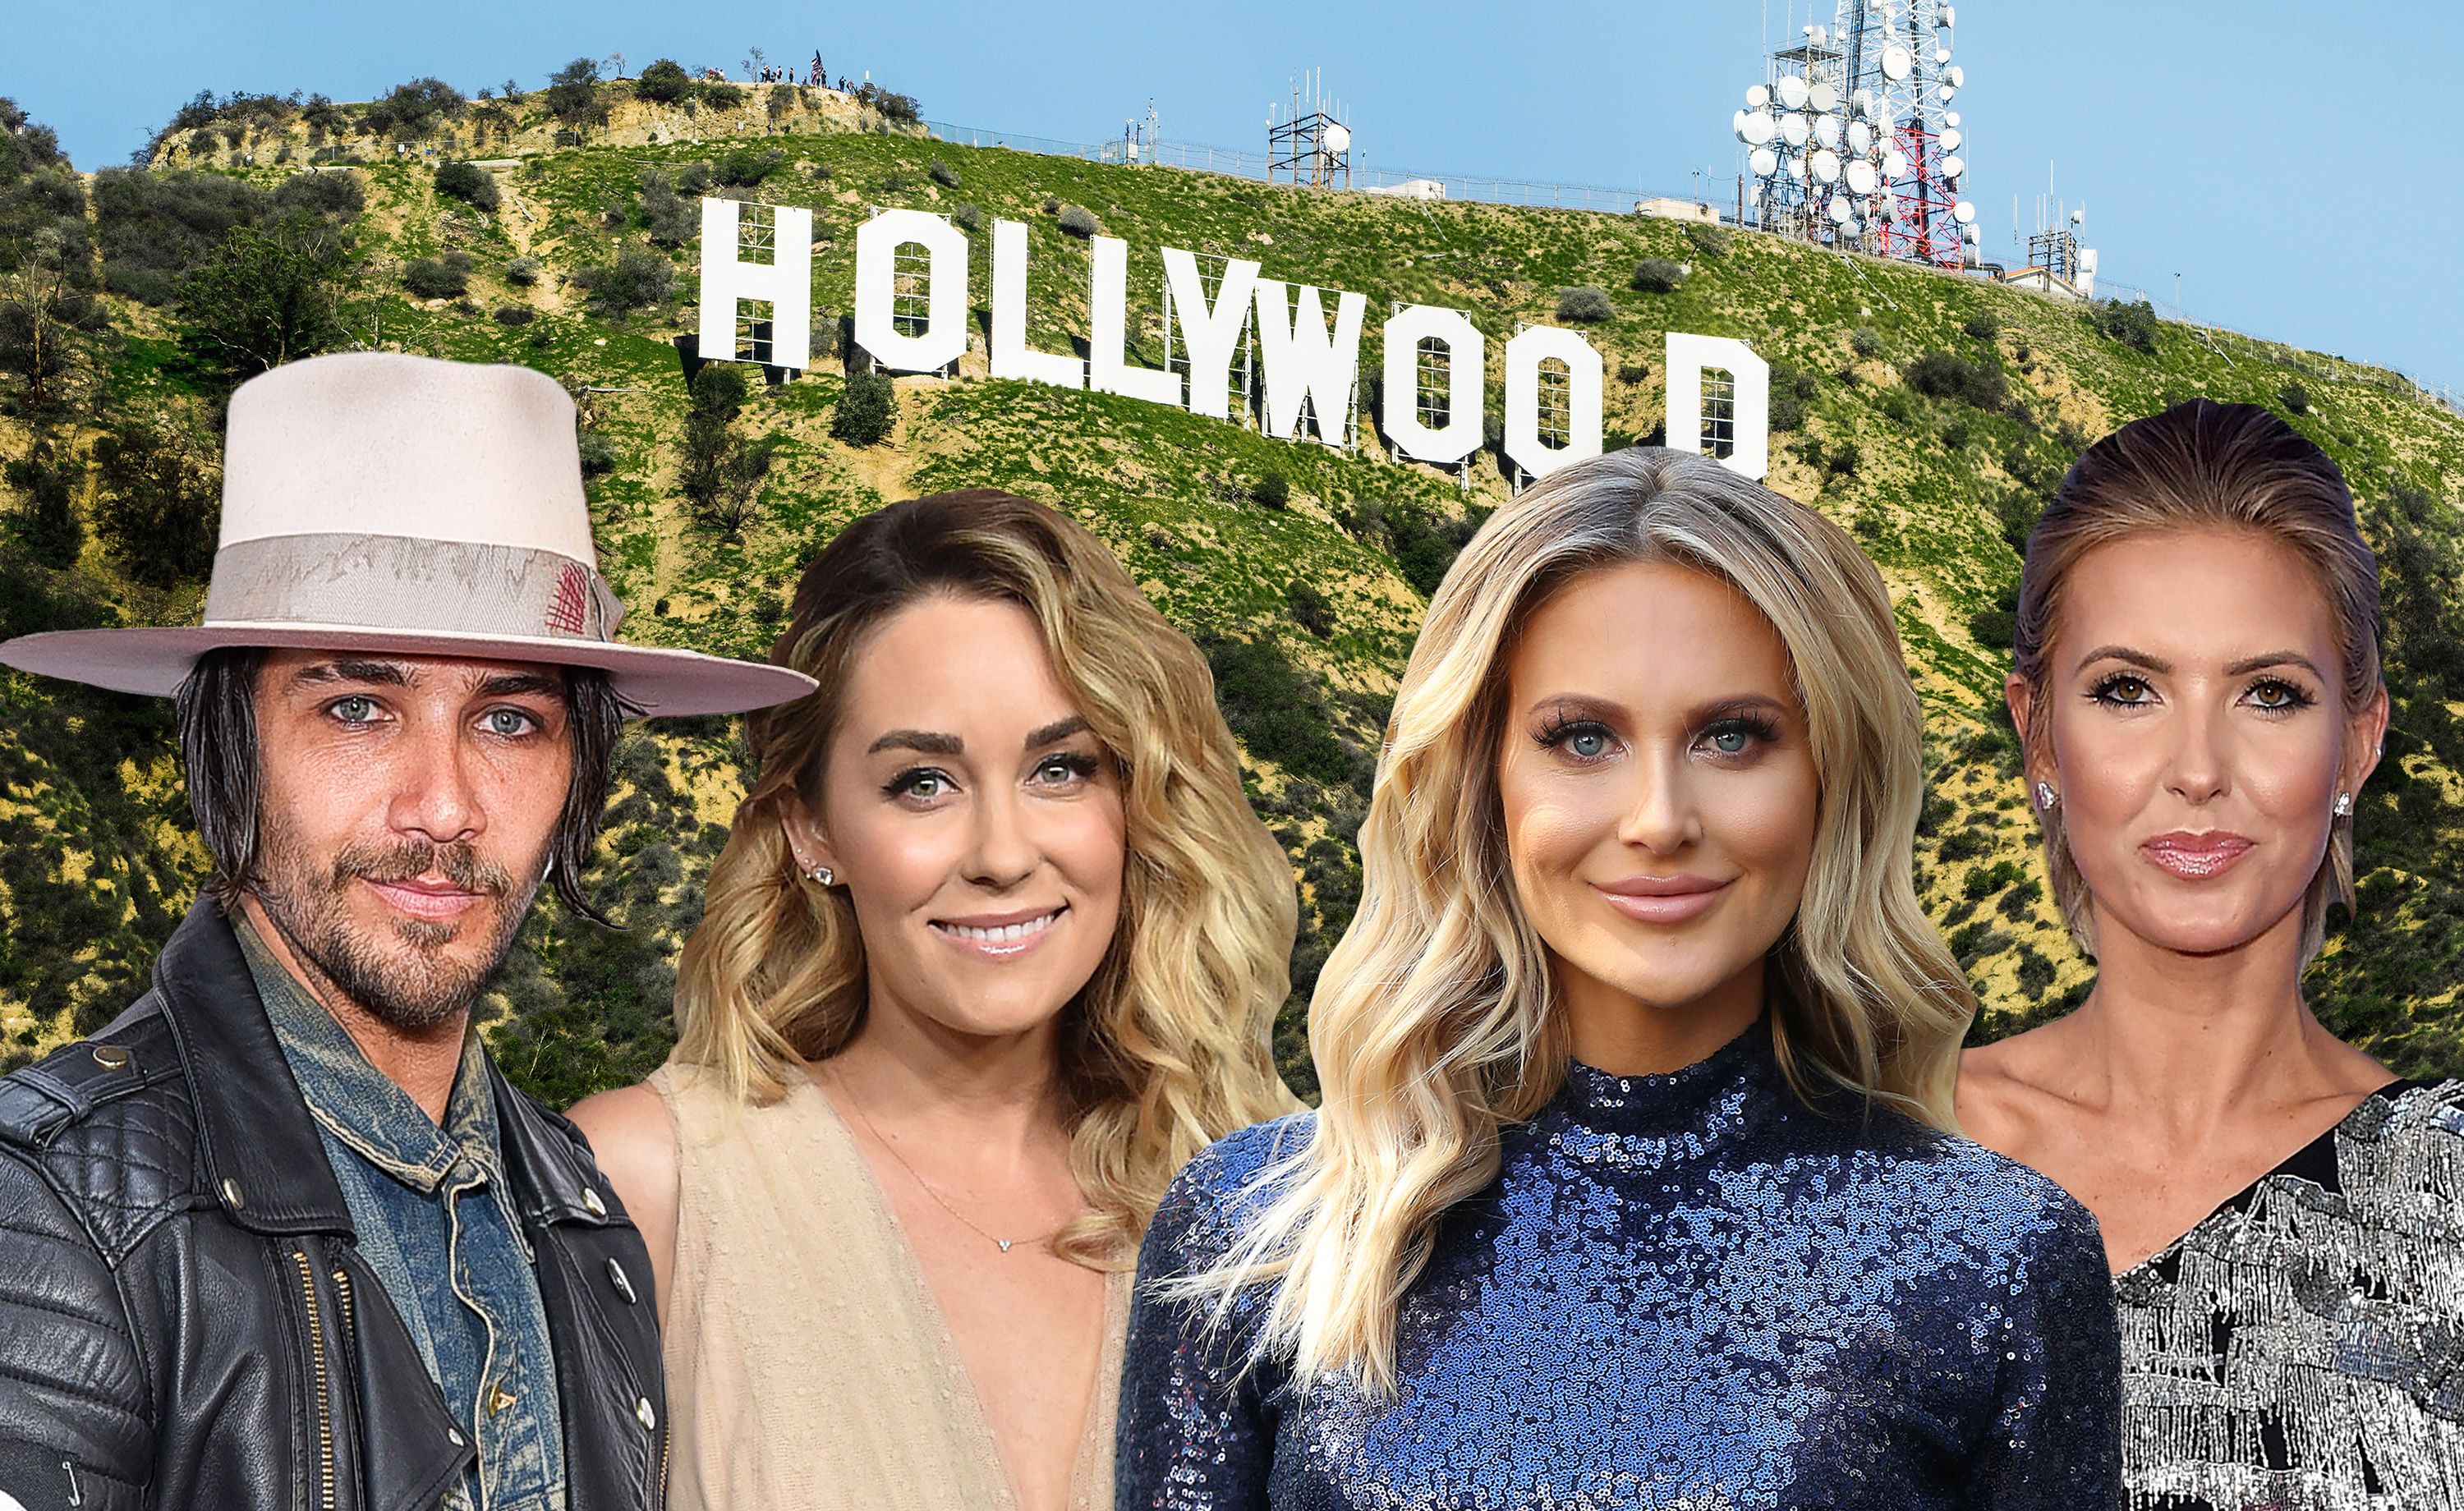 MTV Is Reportedly Considering a 'Hills' Reboot Without Lauren Conrad